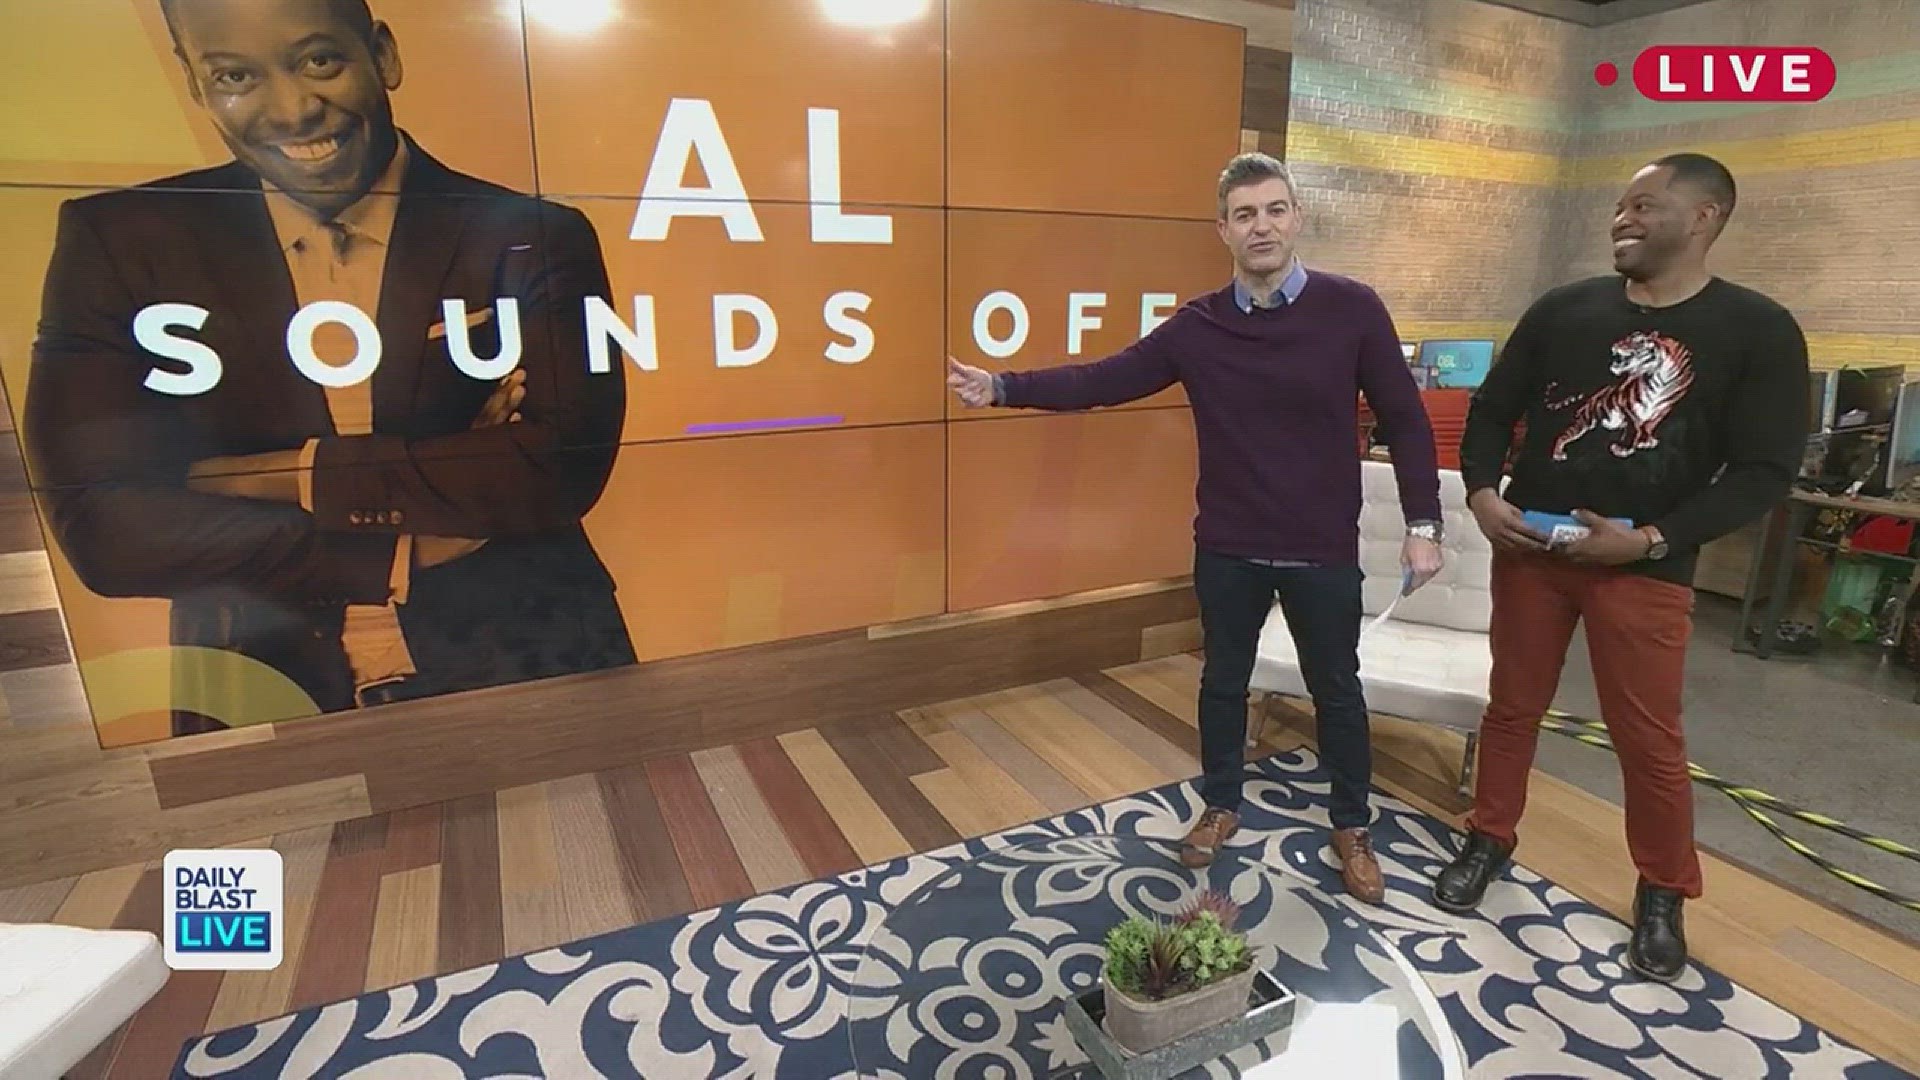 Comedian, Al Jackson, sounds off about some of the funniest viral videos of the weekend. From a baby race to Louis Vuitton chaps. Al sounds off about it all in today's "Al Sounds Off."